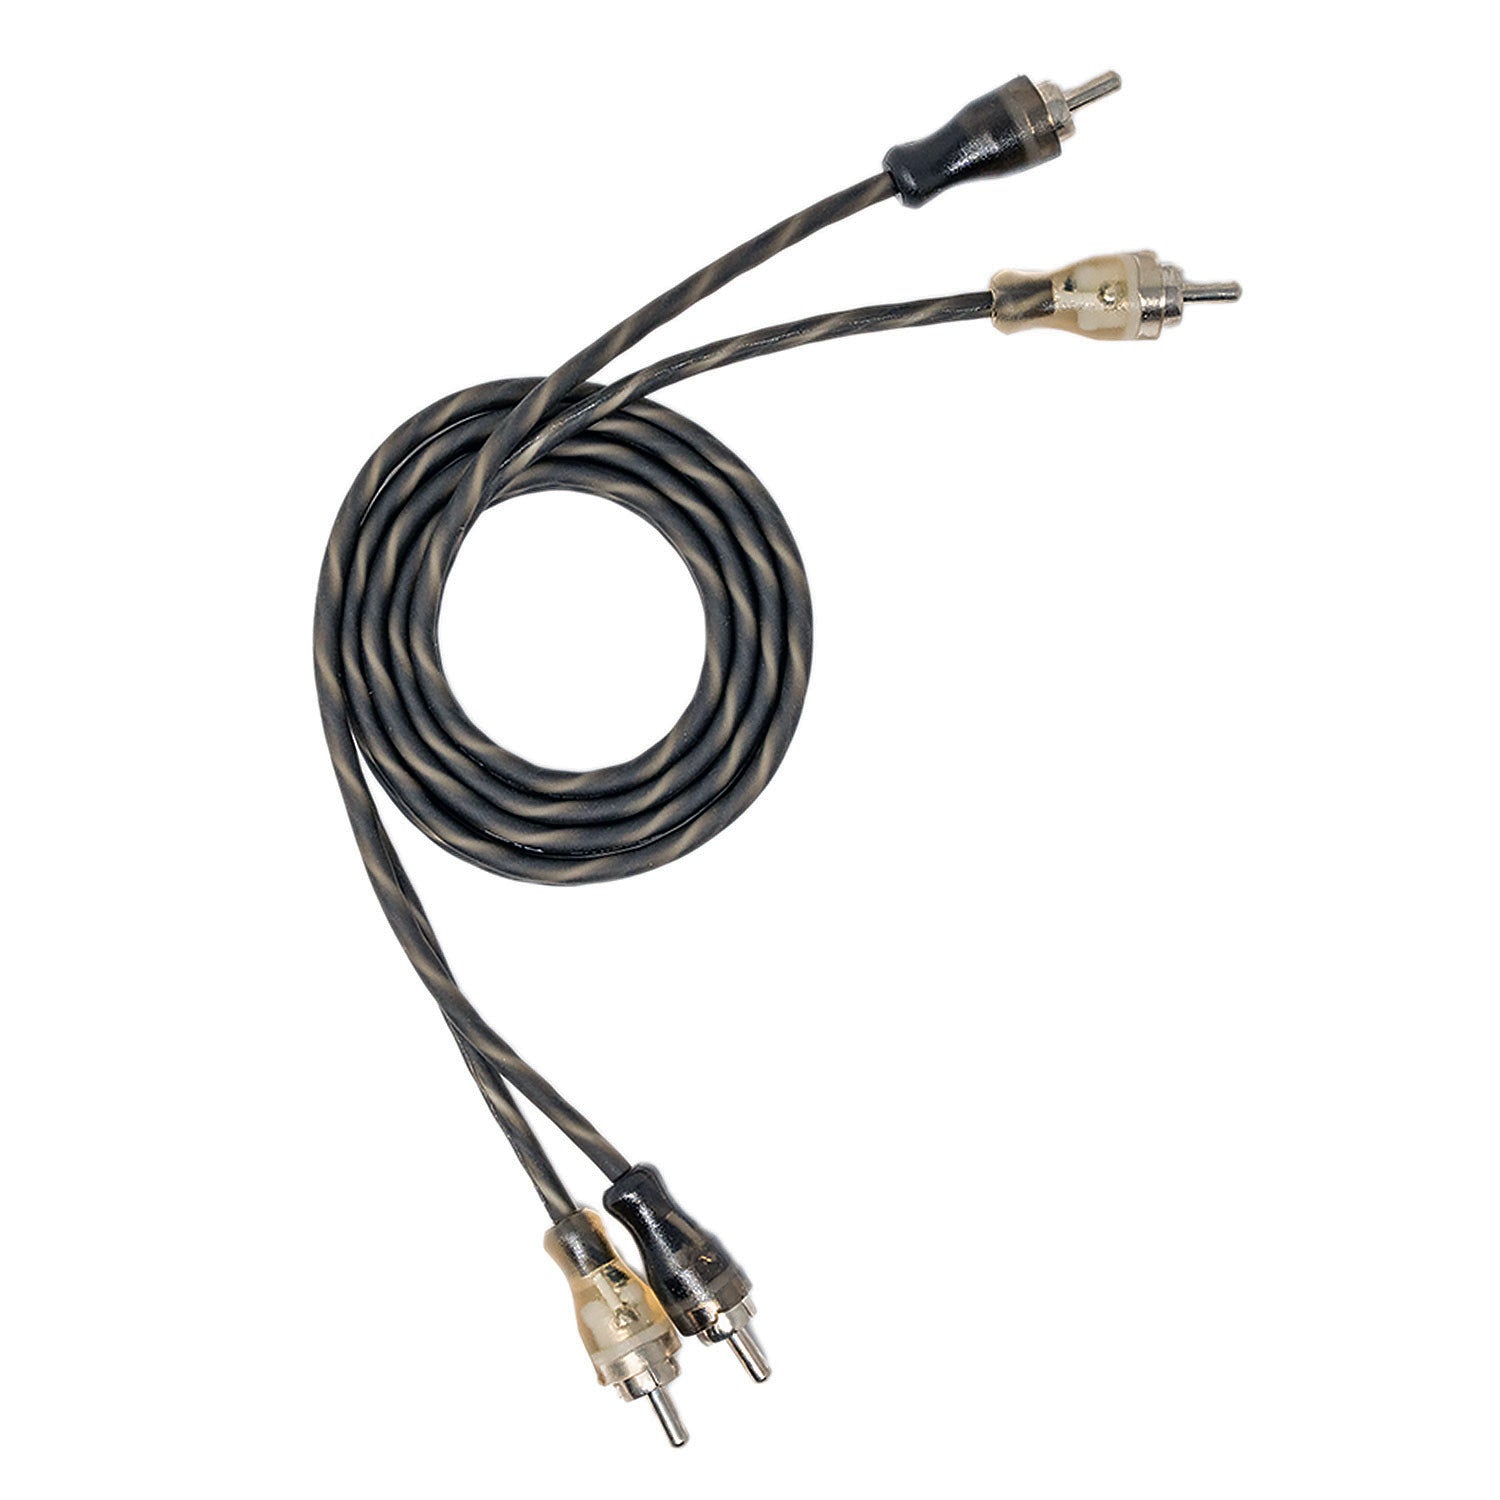 SoundBox LC-T3, Twisted Pair RCA Interconnect Cable, 3 Ft. - (Polybag Packaging)